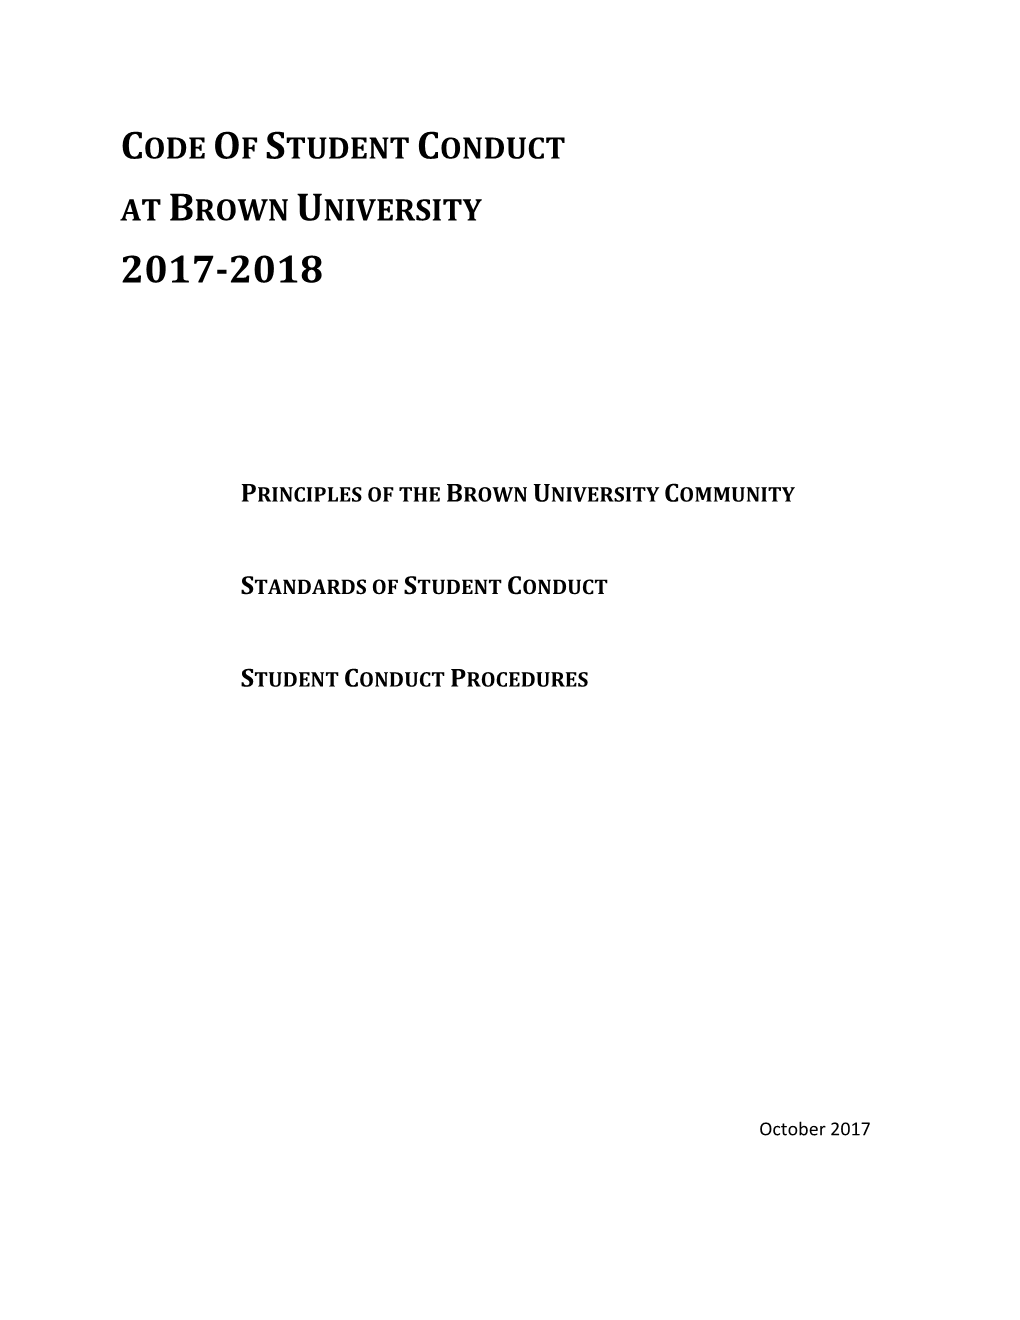 Code of Student Conduct at Brown University 2017-2018